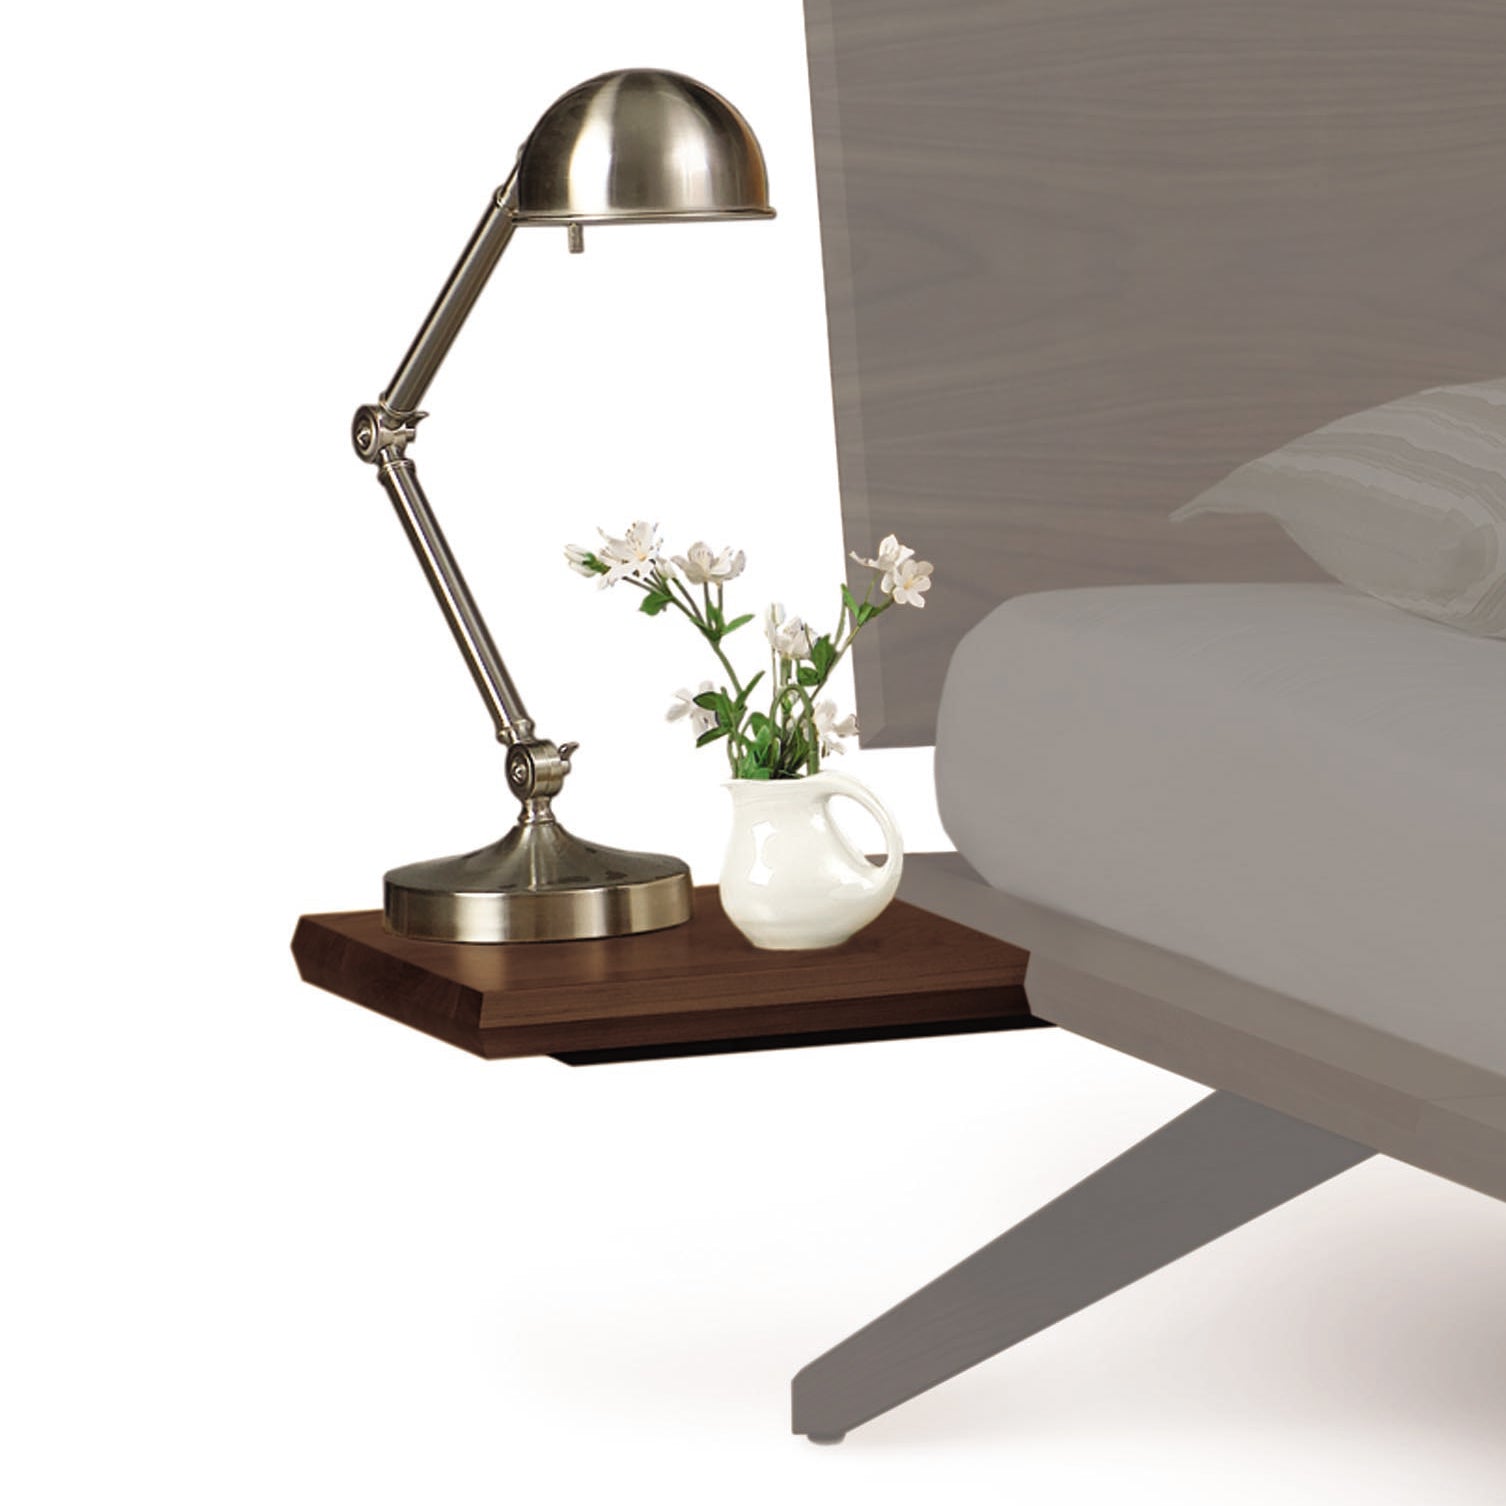 A brass desk lamp sits on a Copeland Furniture Astrid Shelf Nightstand next to a small white vase with flowers in a minimalist style.